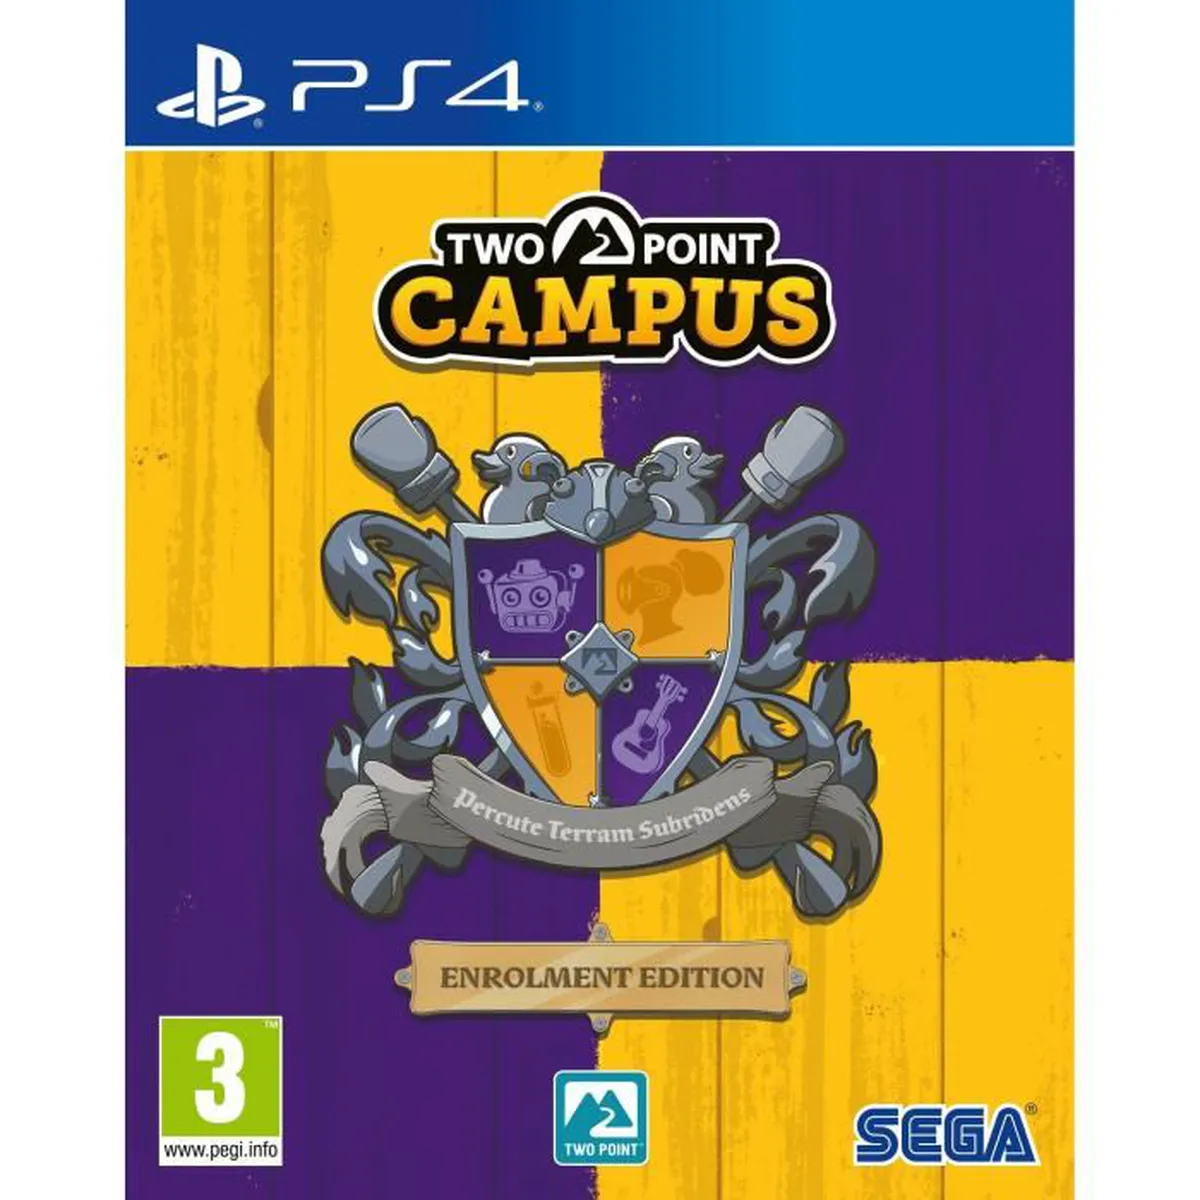 Two Point Campus sur PS4